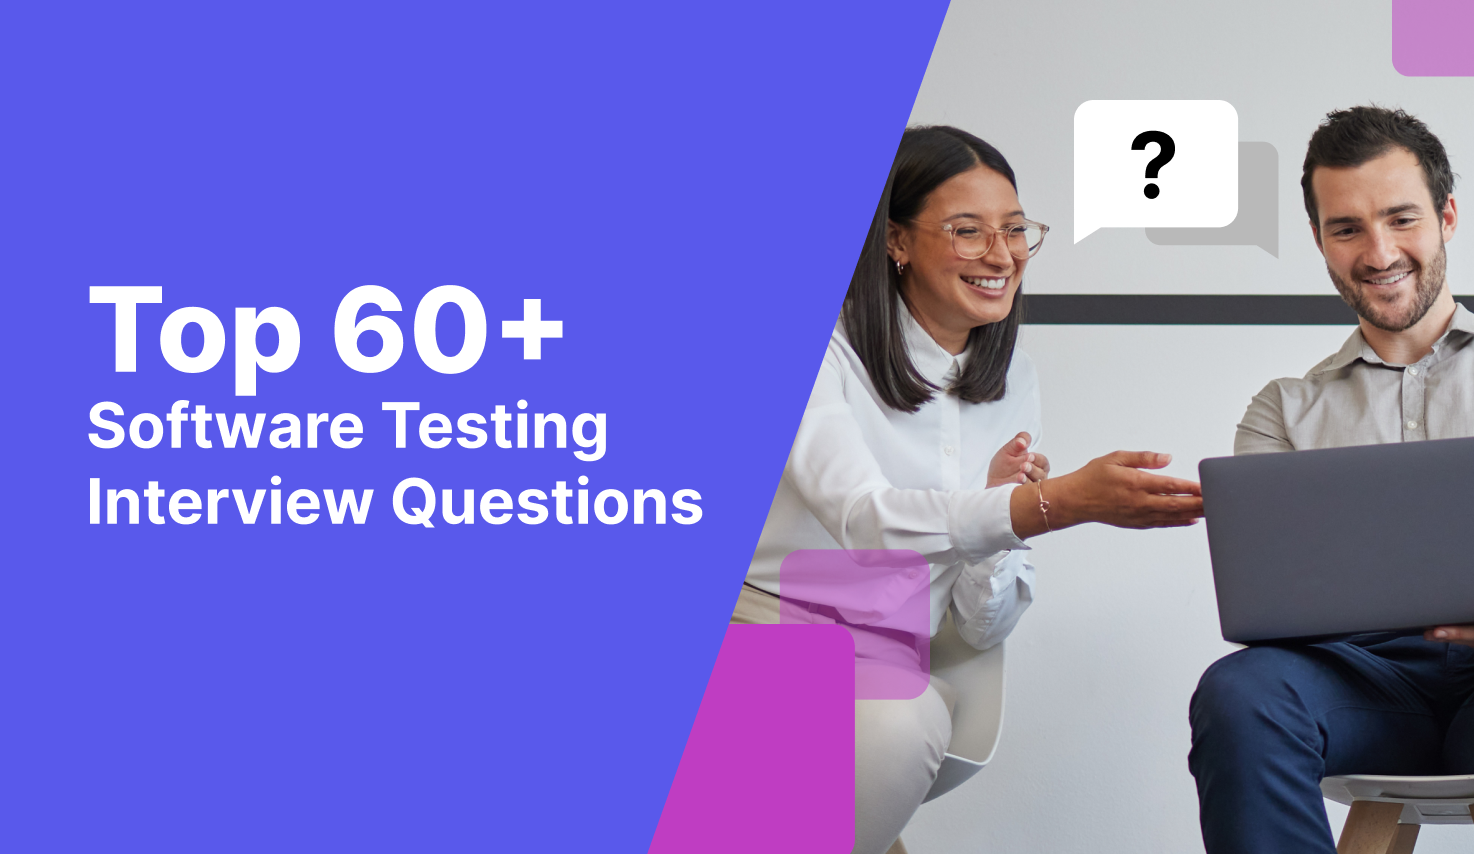 software testing interview questions and answers.png